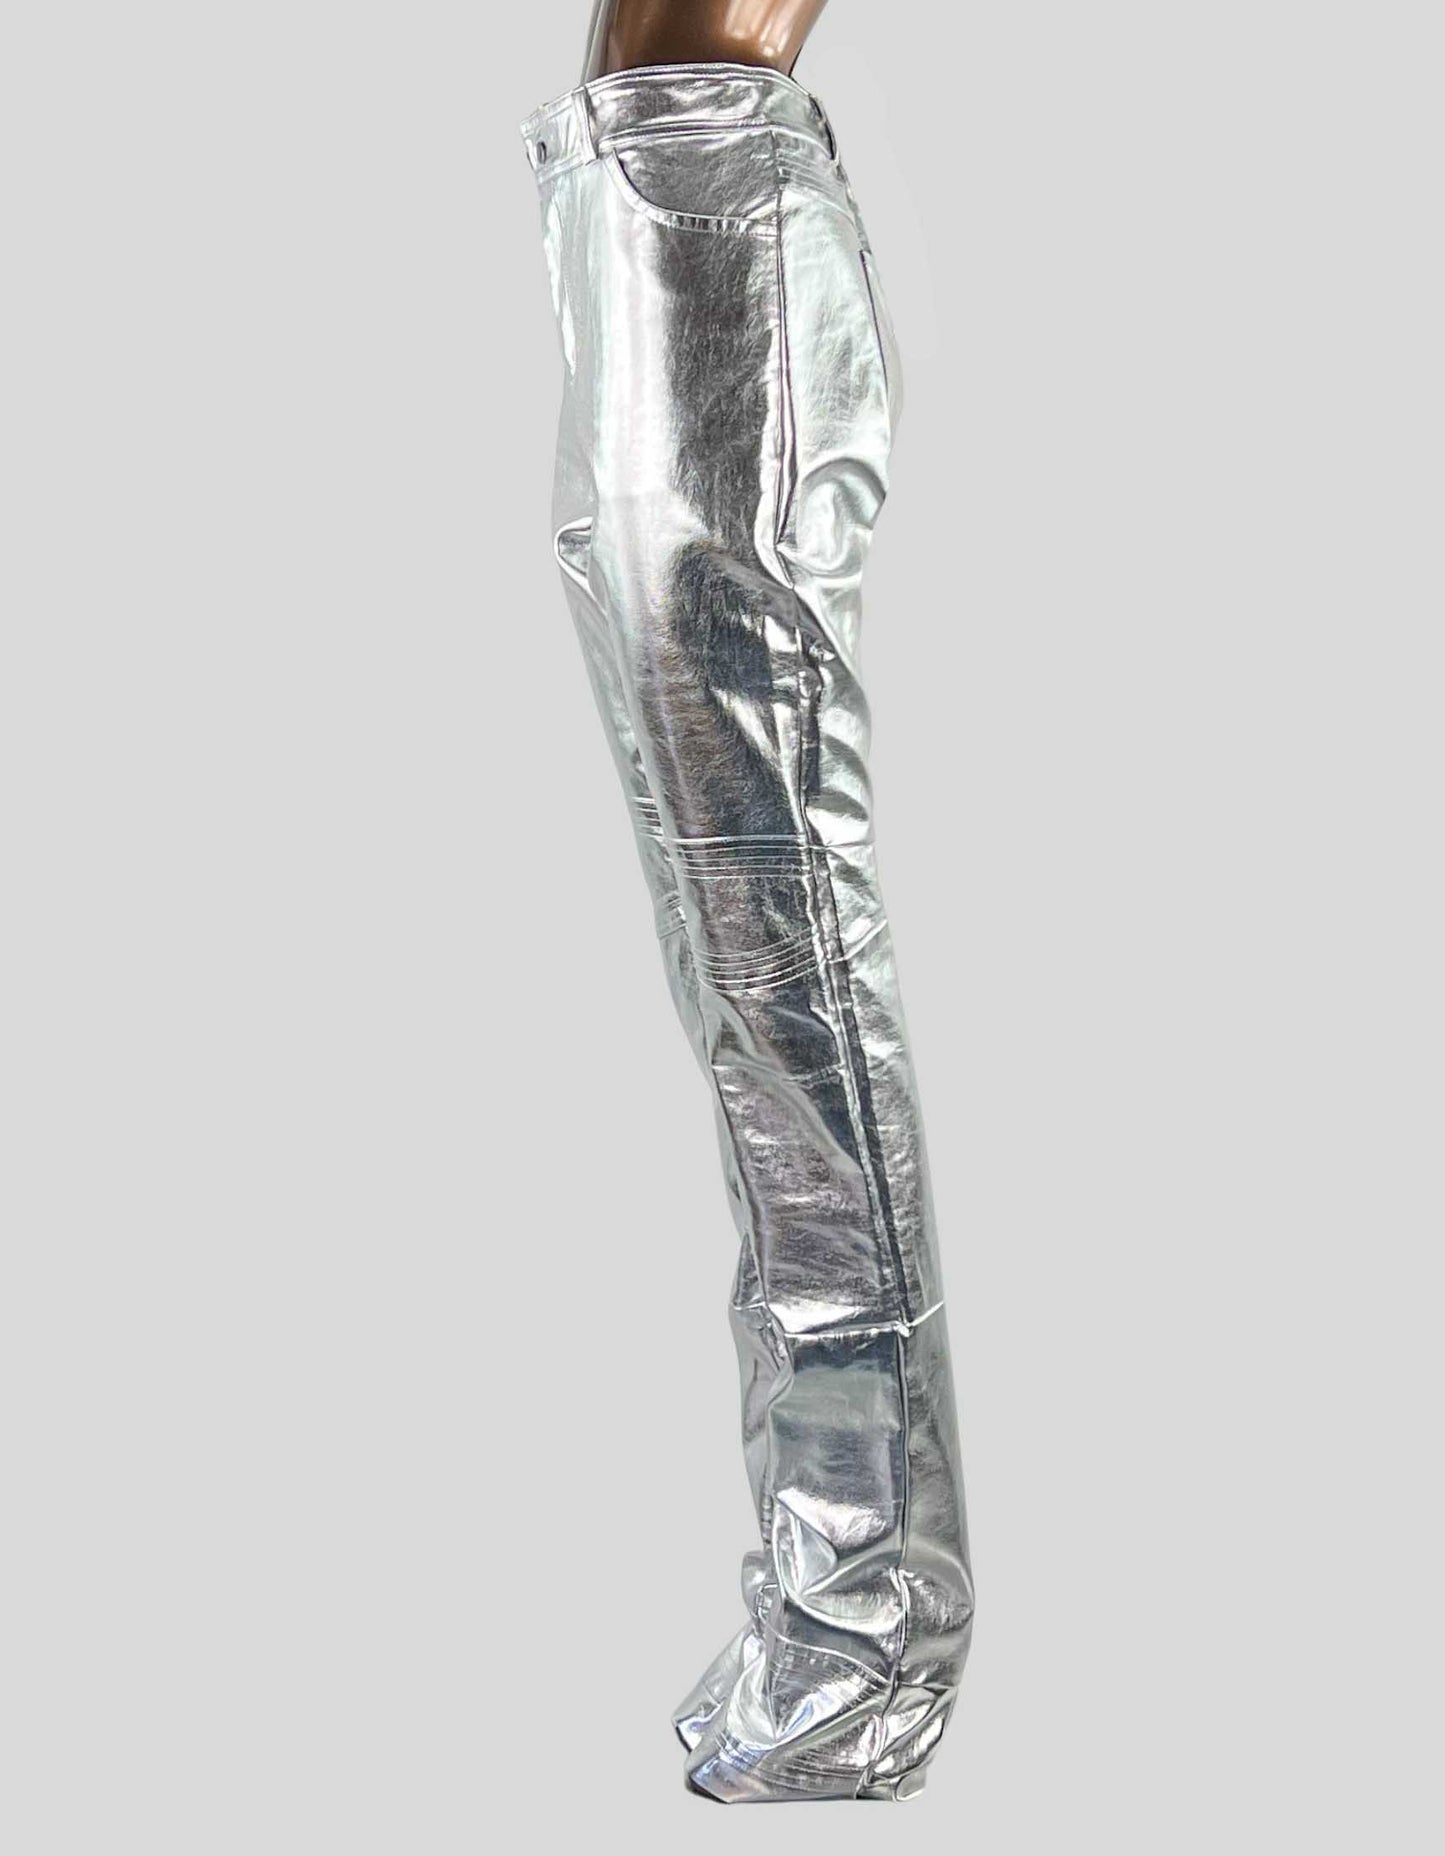 NYRVA Unisex Stacked Silver Surfer Metallic Leather Pants